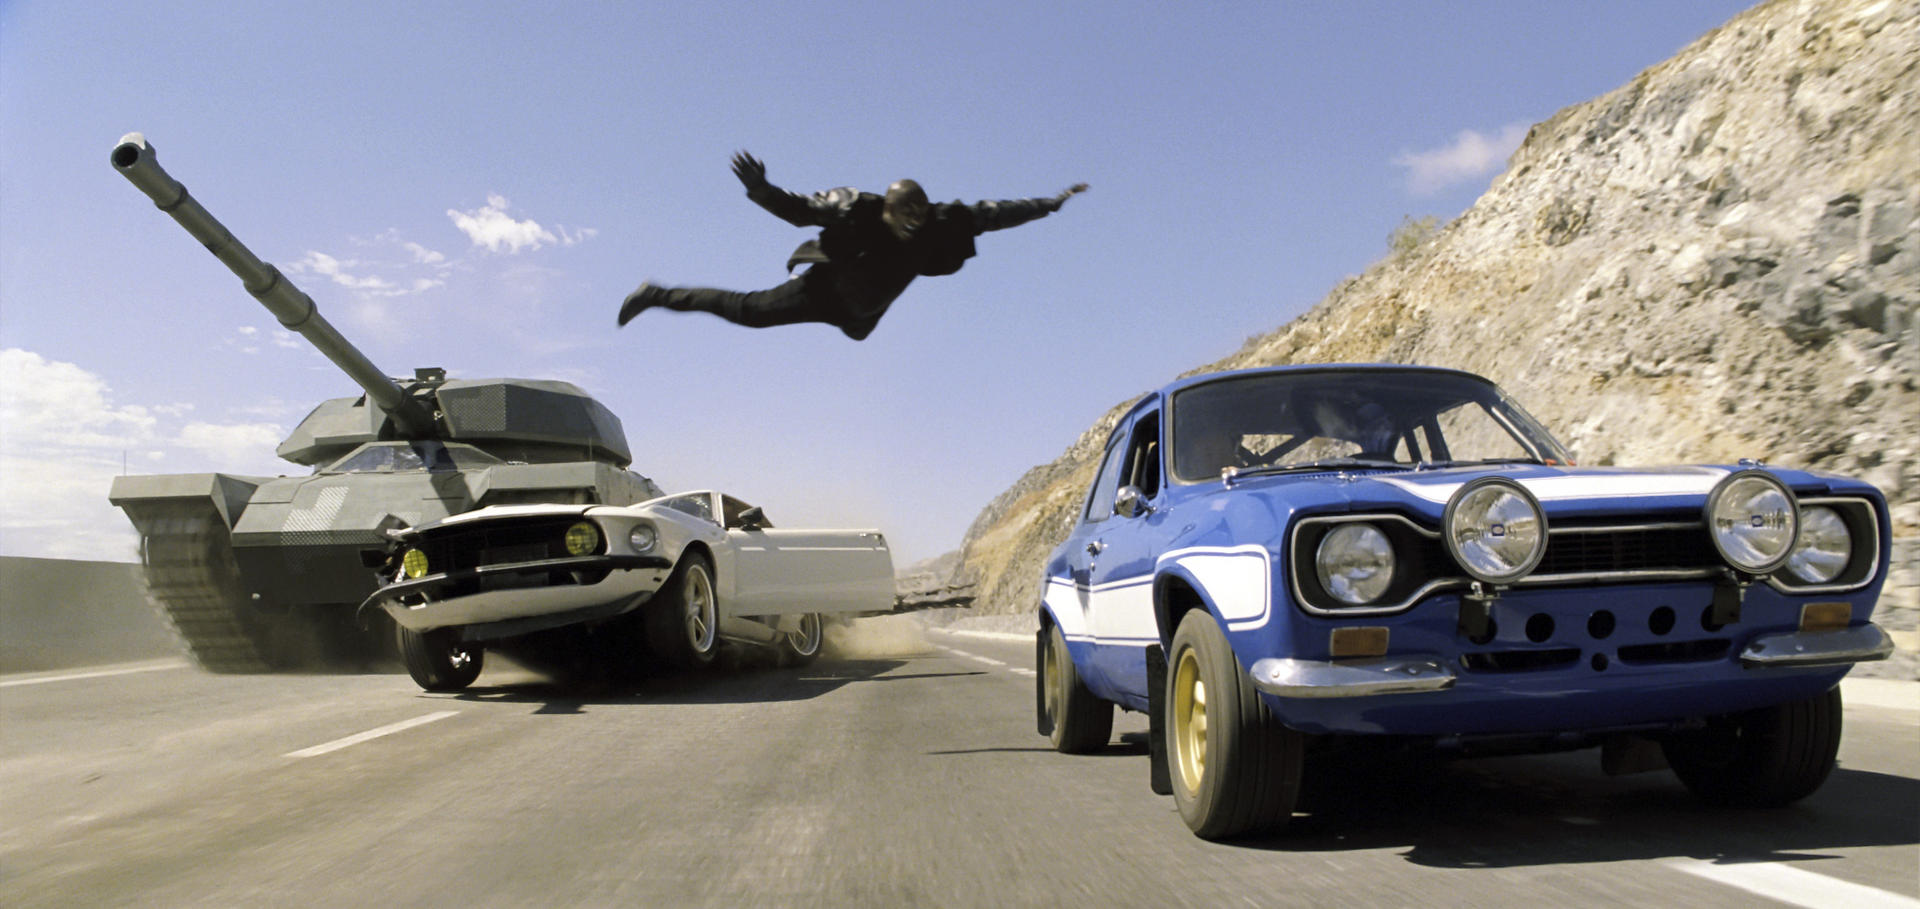 White-knuckled road action in Furious 7.